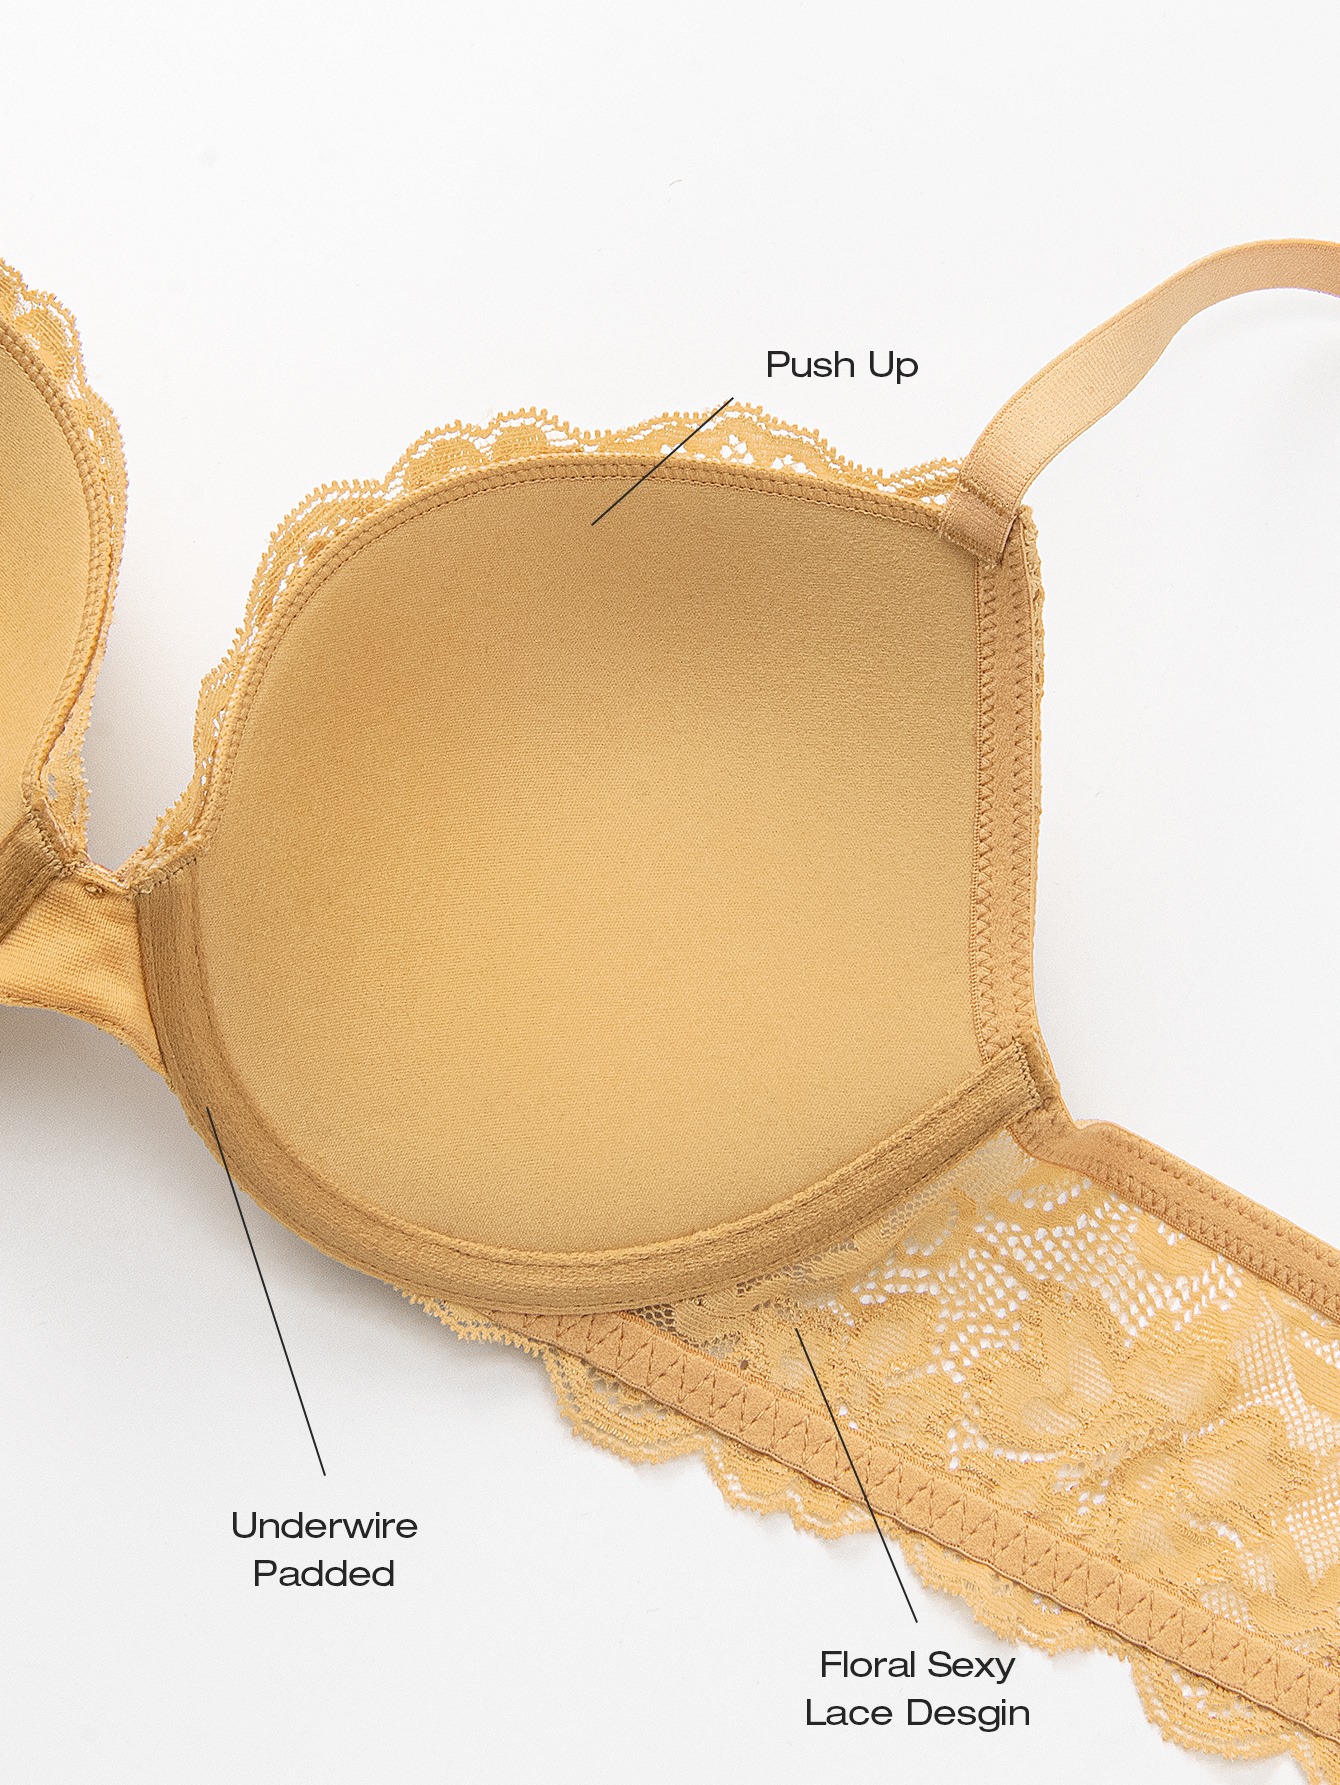 Deyllo Women's Sexy Lace Push Up Padded Plunge Add Cups Underwire Lift Up Bra, Gold 36B - image 5 of 8